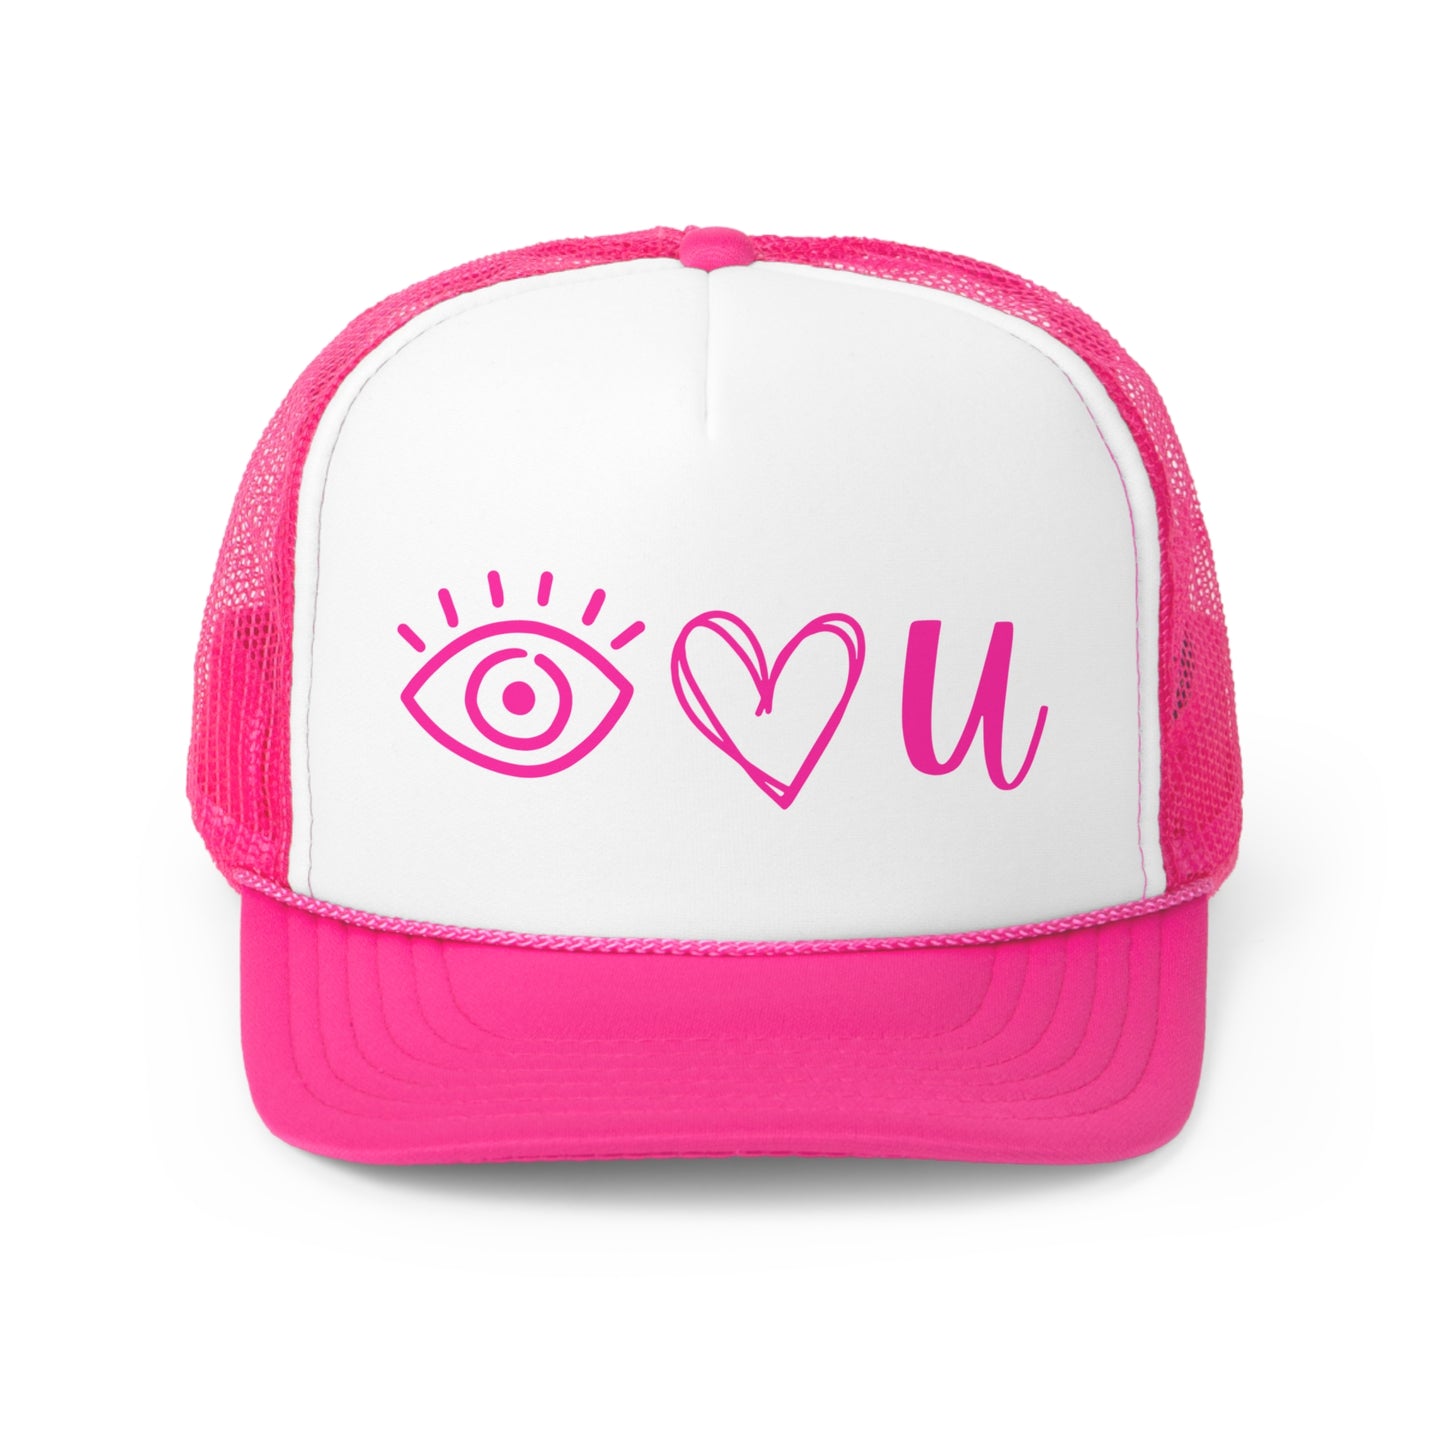 I Love You hat